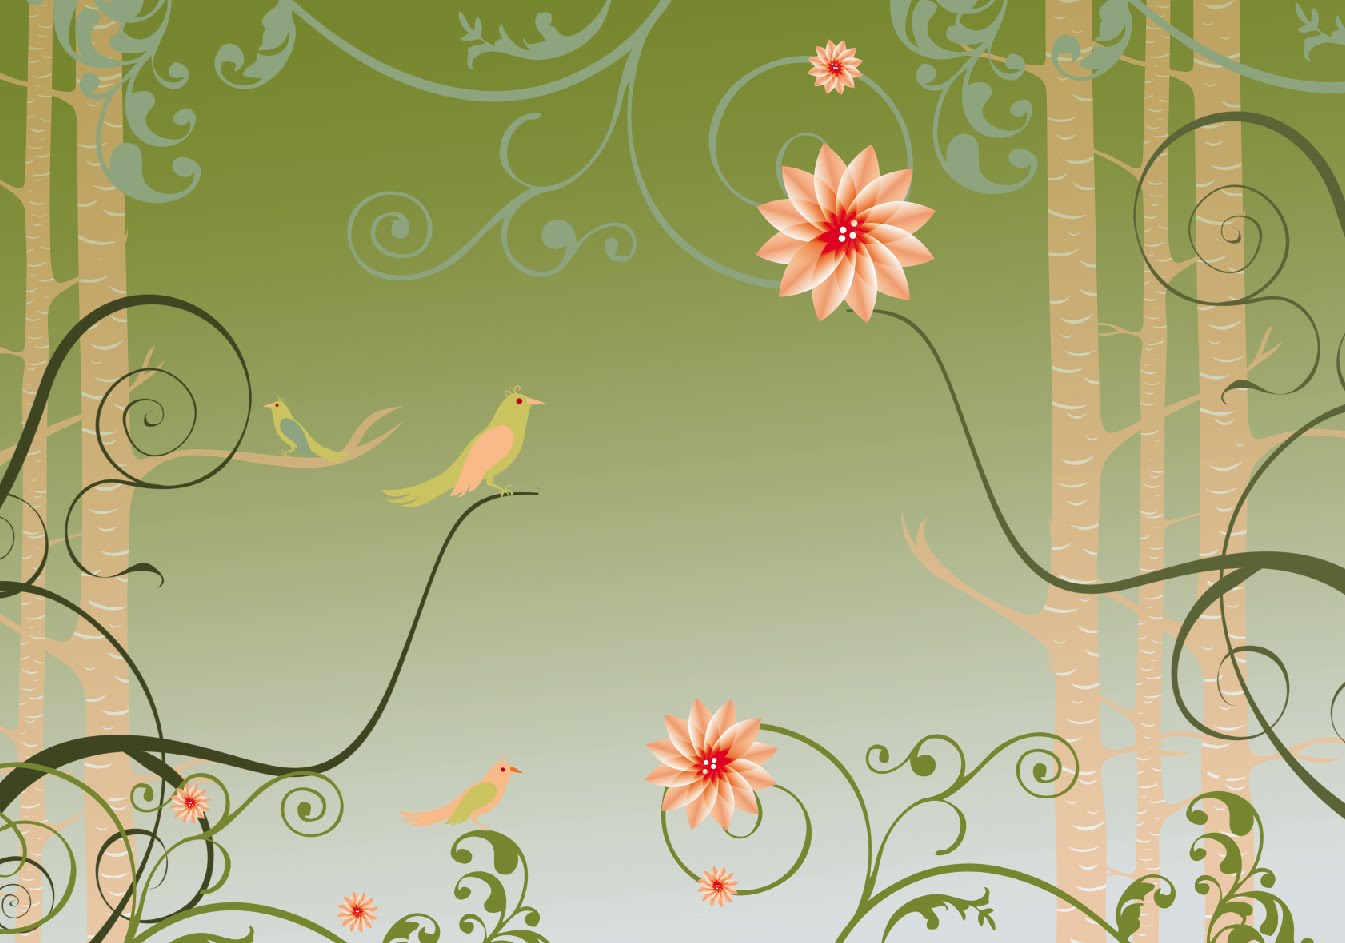 Green swirly with birds backgrounds